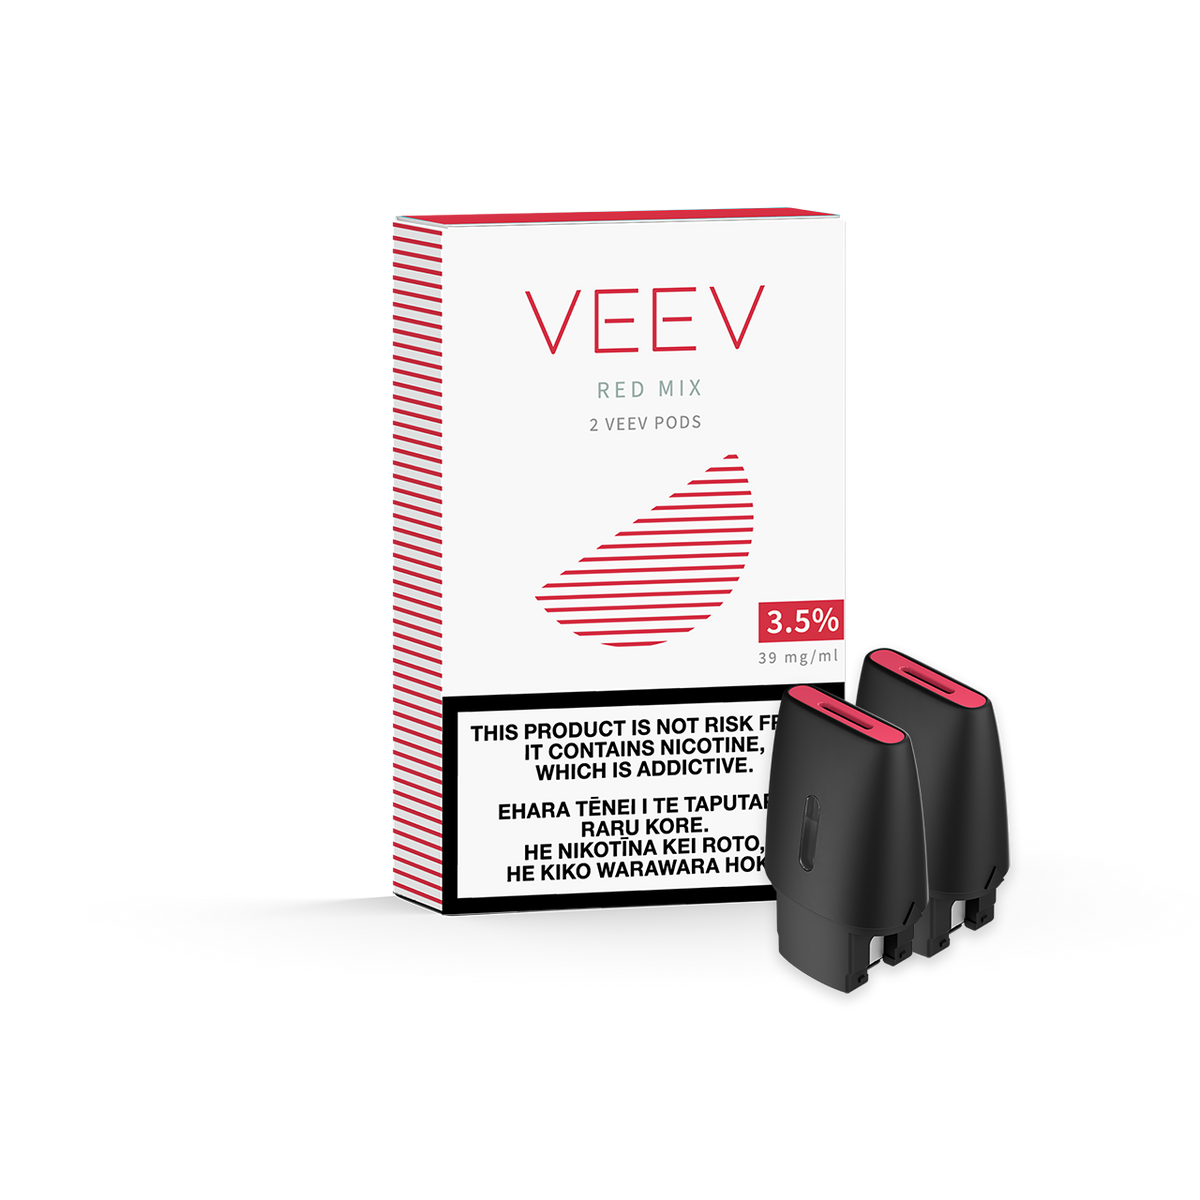 IQOS VEEV Classic Blond Single Pack 0.035 nicotine vape available in Australia